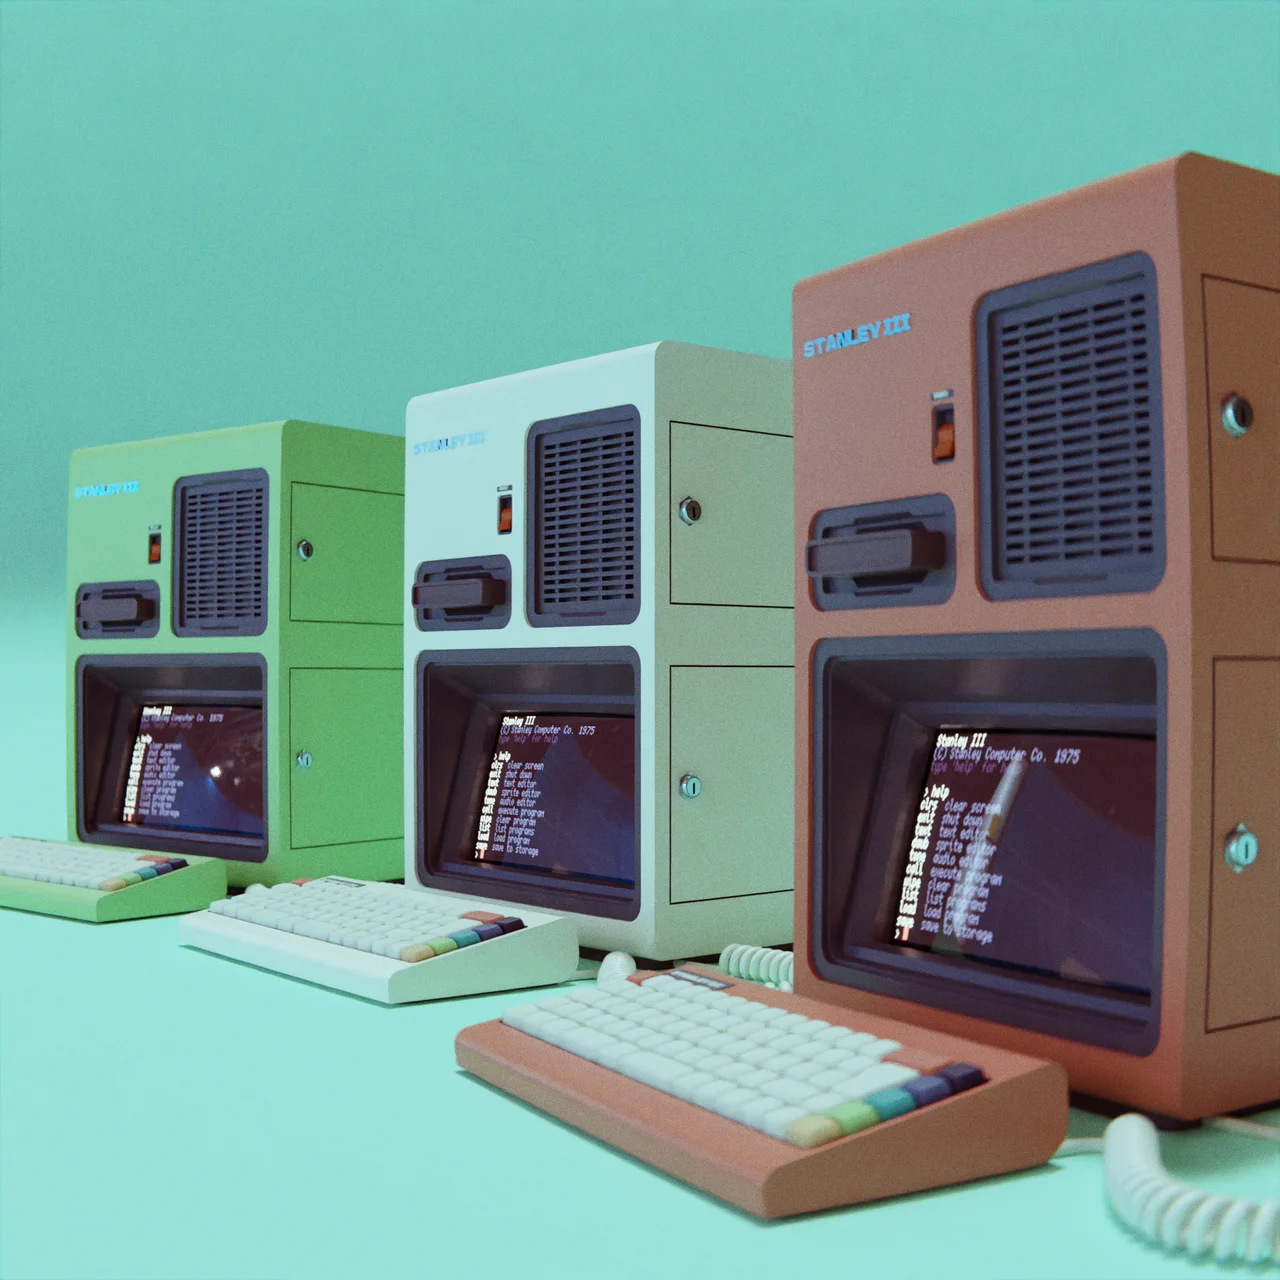 A 3D render of three models of the Stanley computer on a blue studio backdrop. One model's plastic housing is white, one is red and one is in pale green.